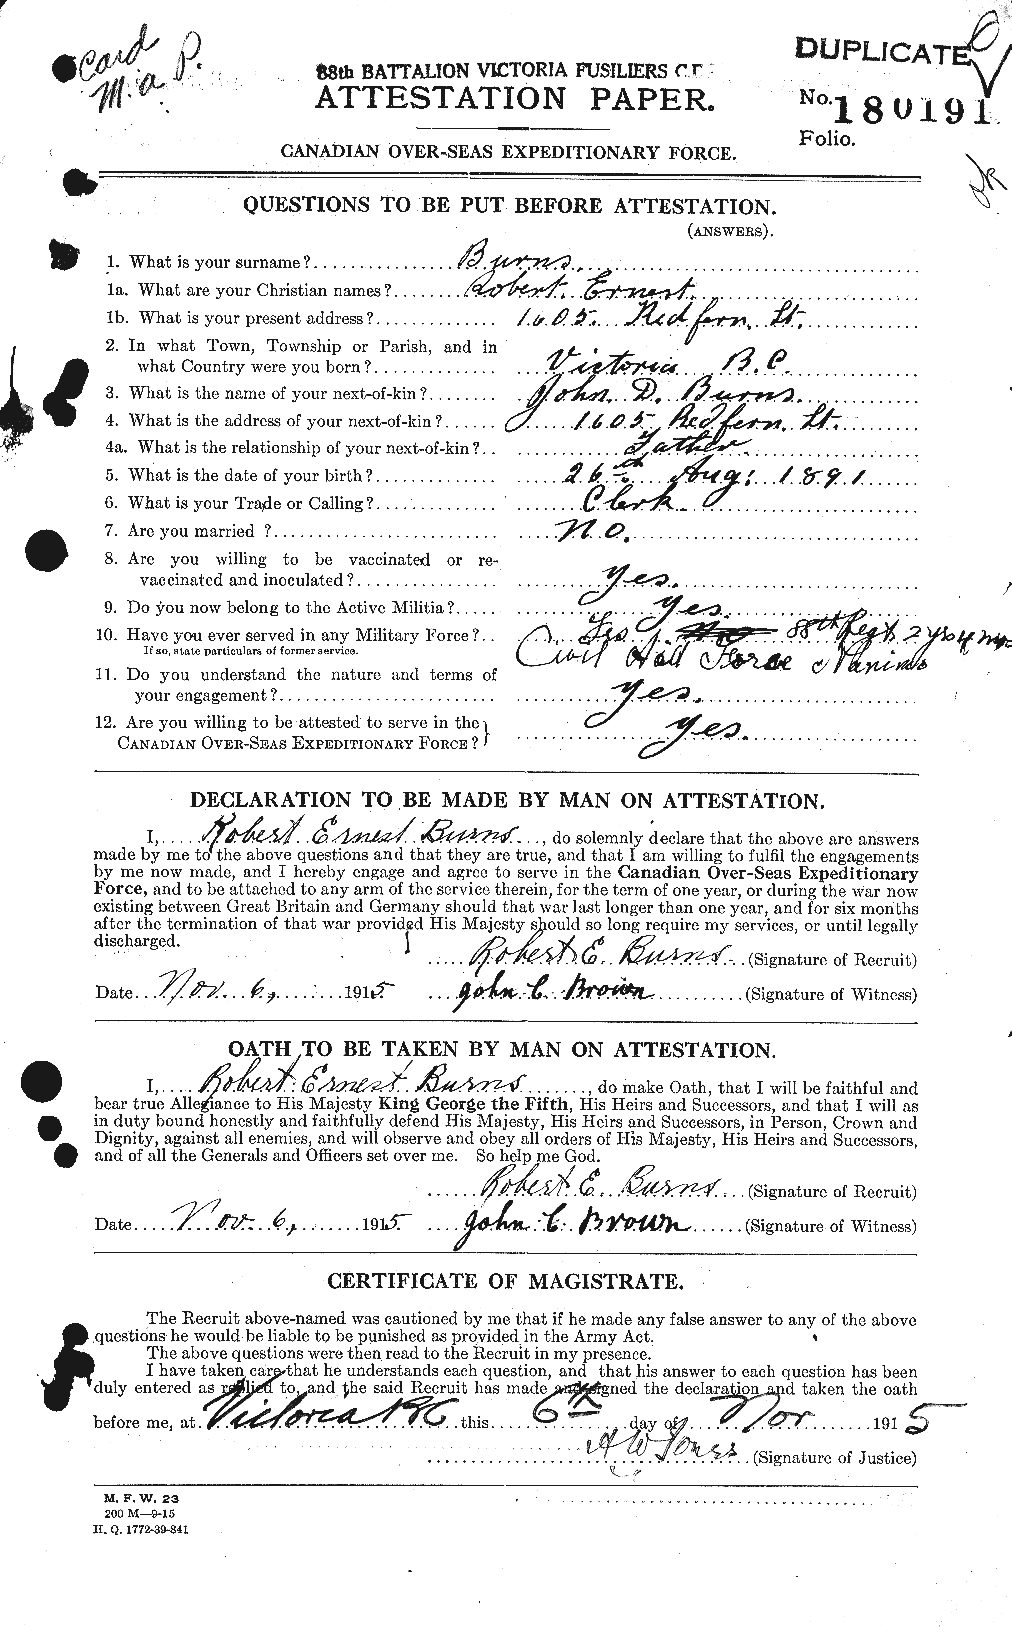 Personnel Records of the First World War - CEF 271728a